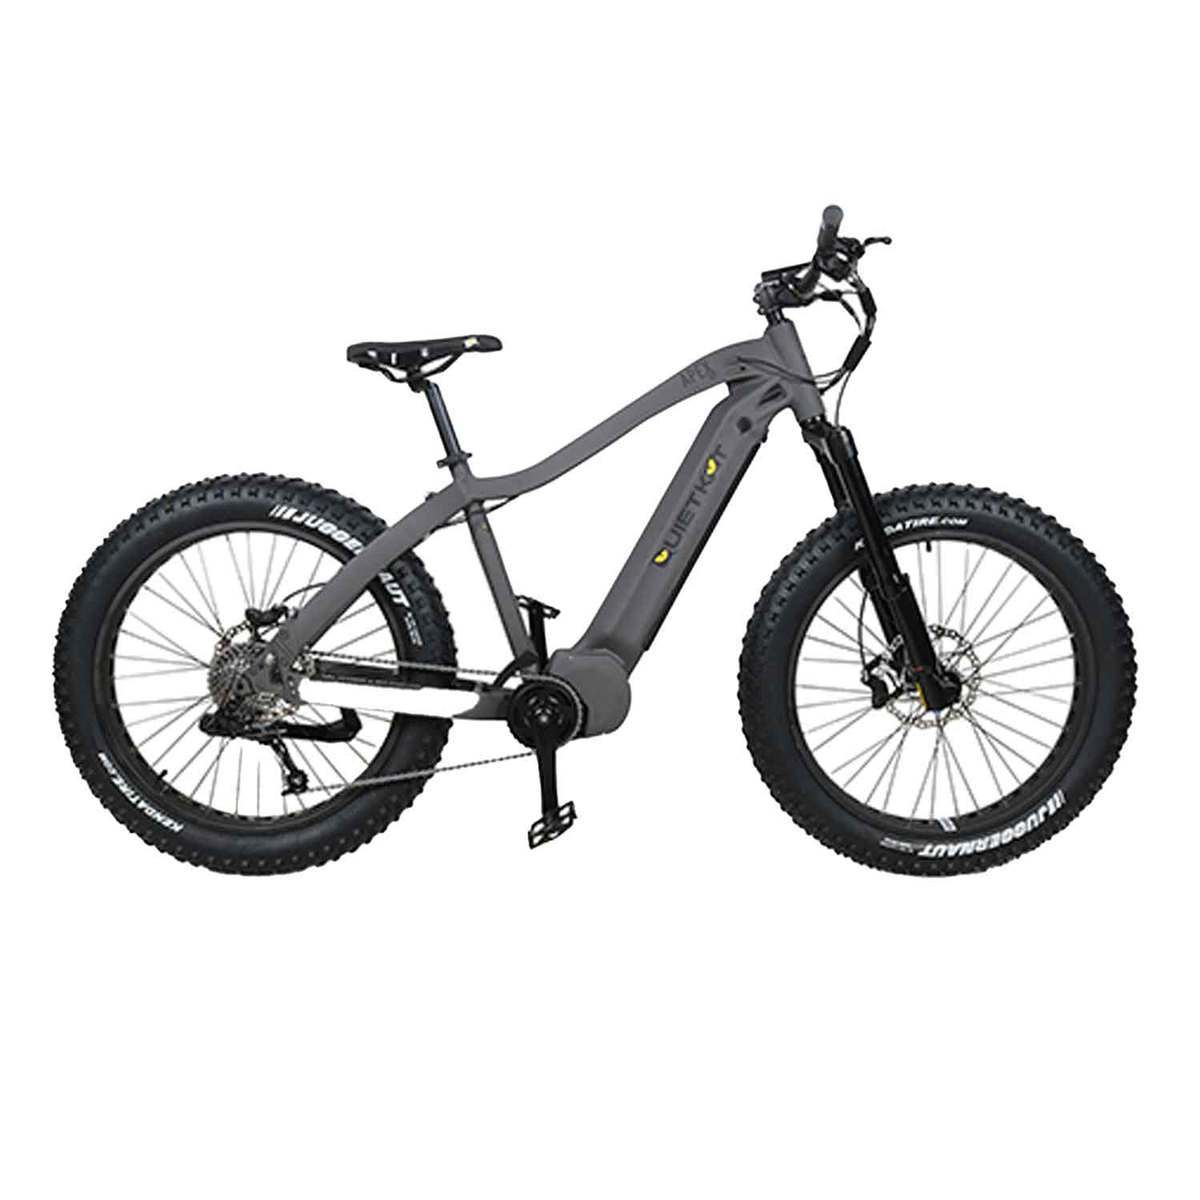 QuietKat 19in 9Speed 2020 Apex EBike Charcoal Charcoal 19in